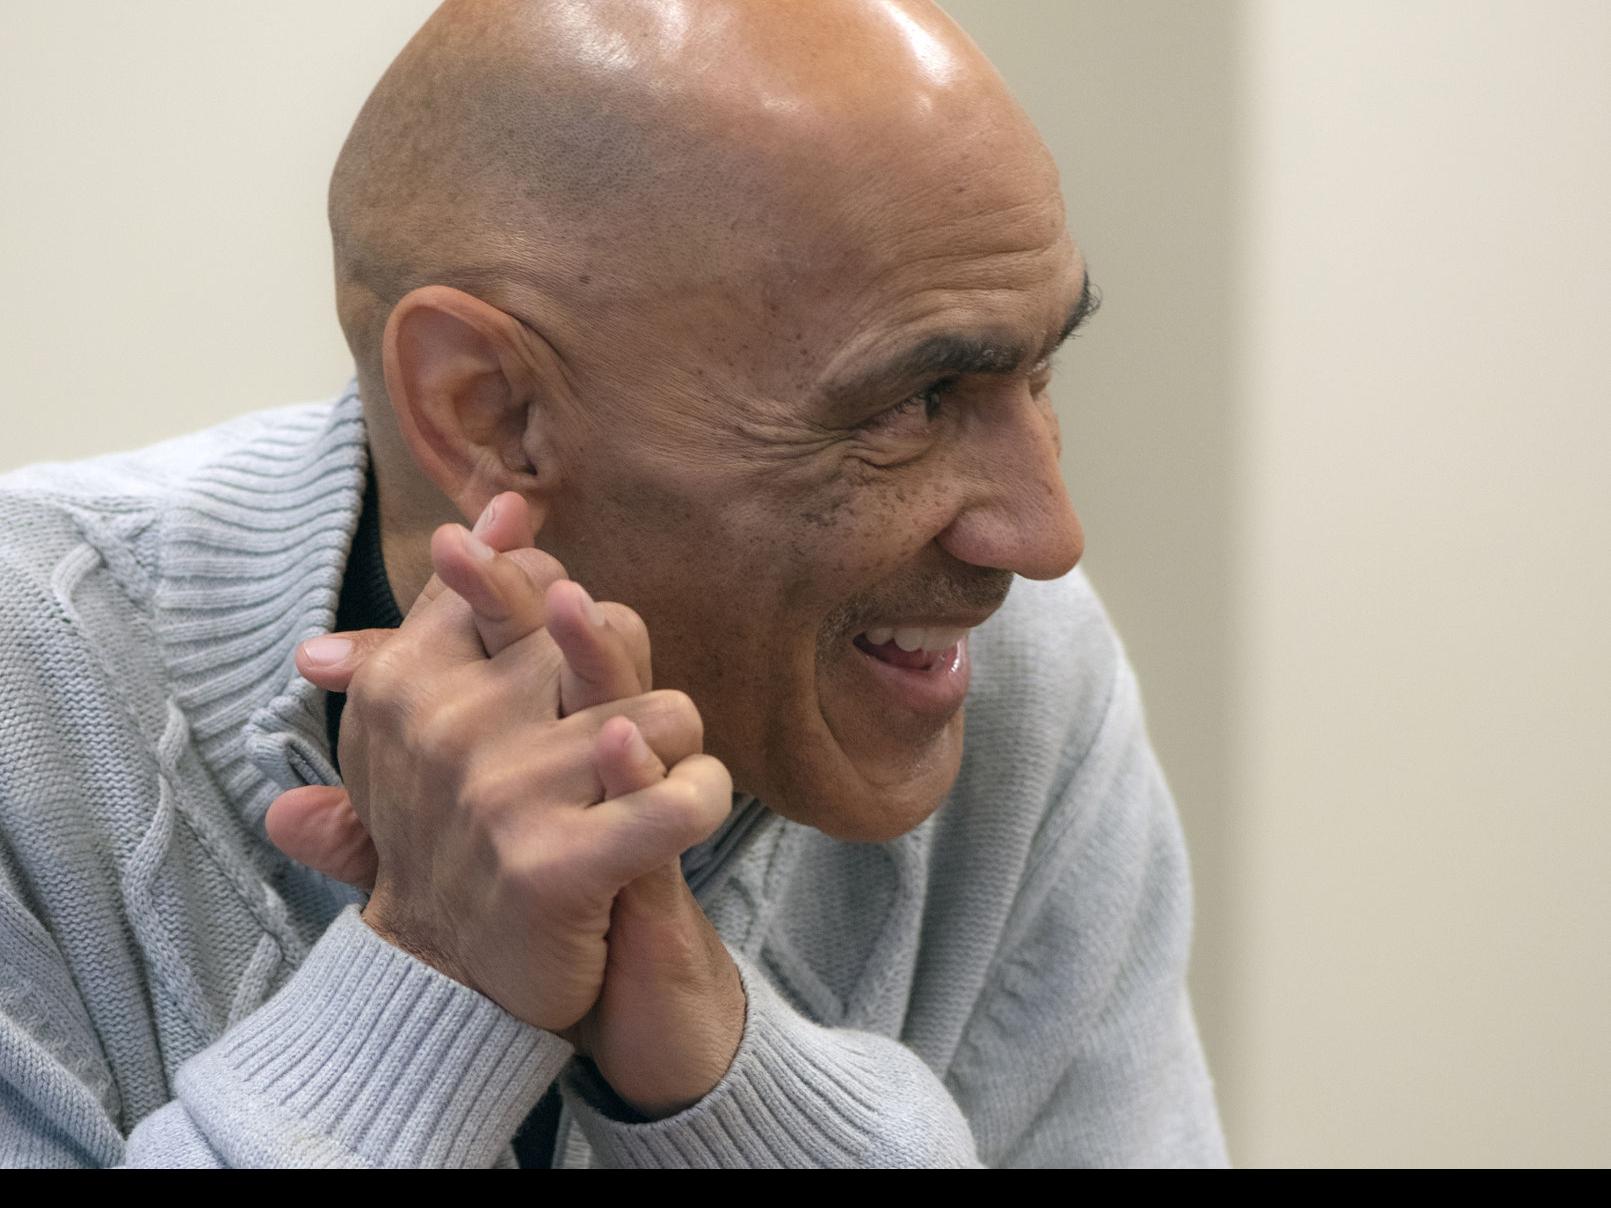 Christian sportscaster Tony Dungy pulls out from speaking at annual men's  conference in Woodland Park, Faith & Values